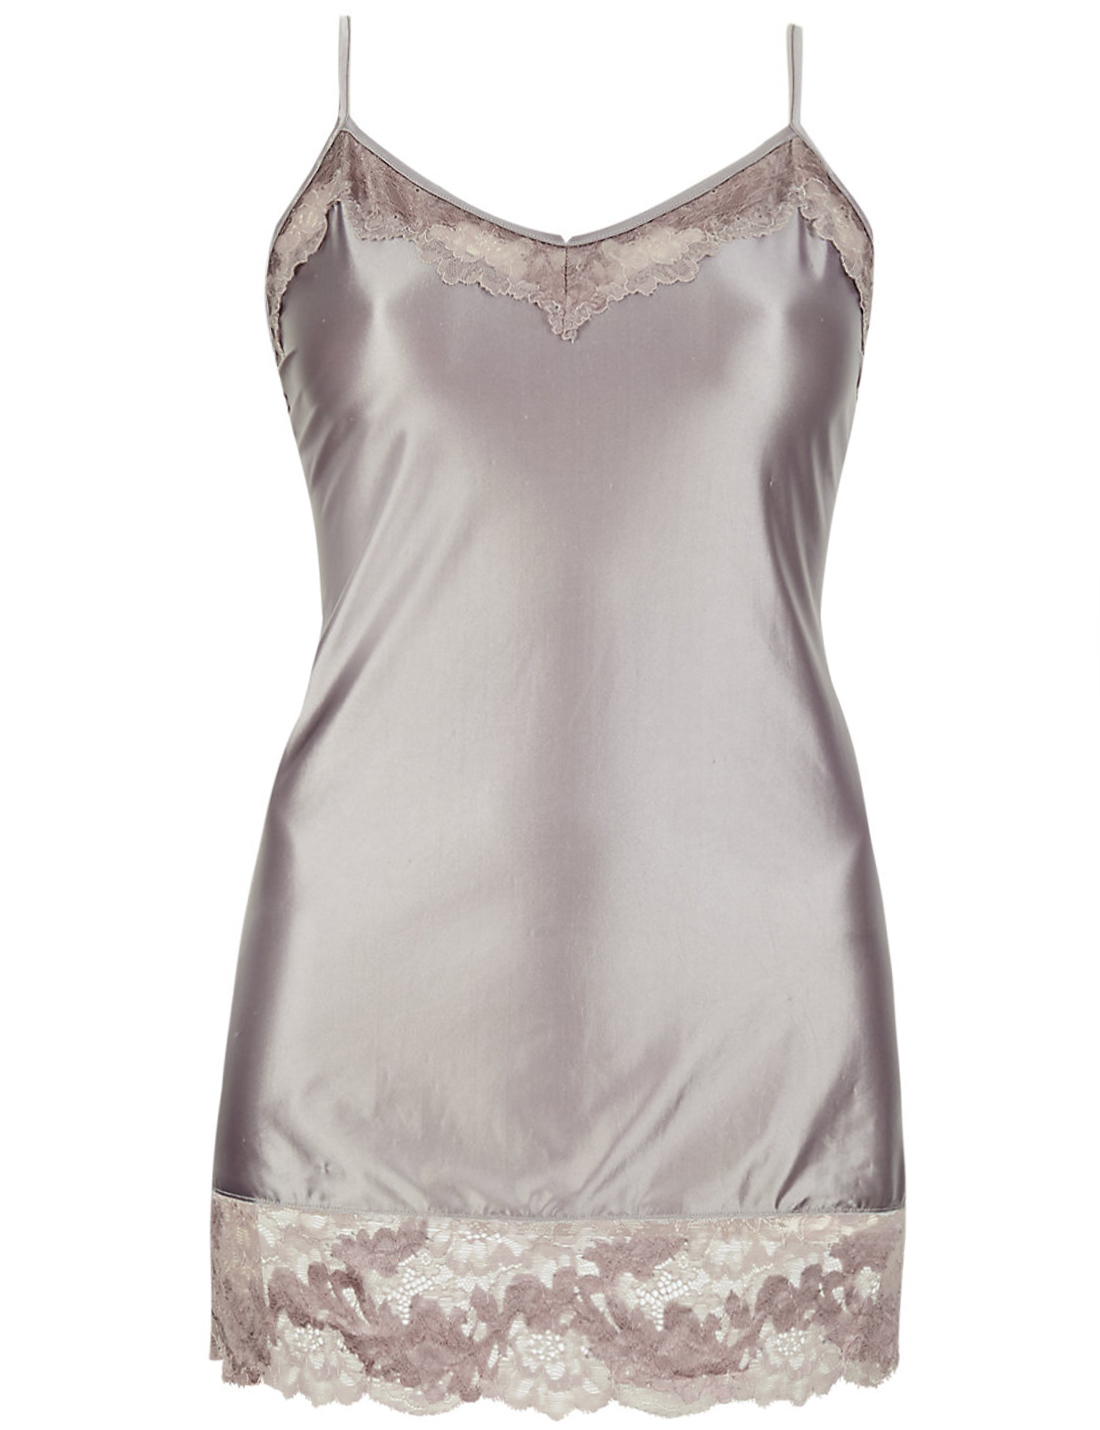 Marks and Spencer - - M&5 PRALINE Sheen Lace Strappy Vest - Size 12 to 20